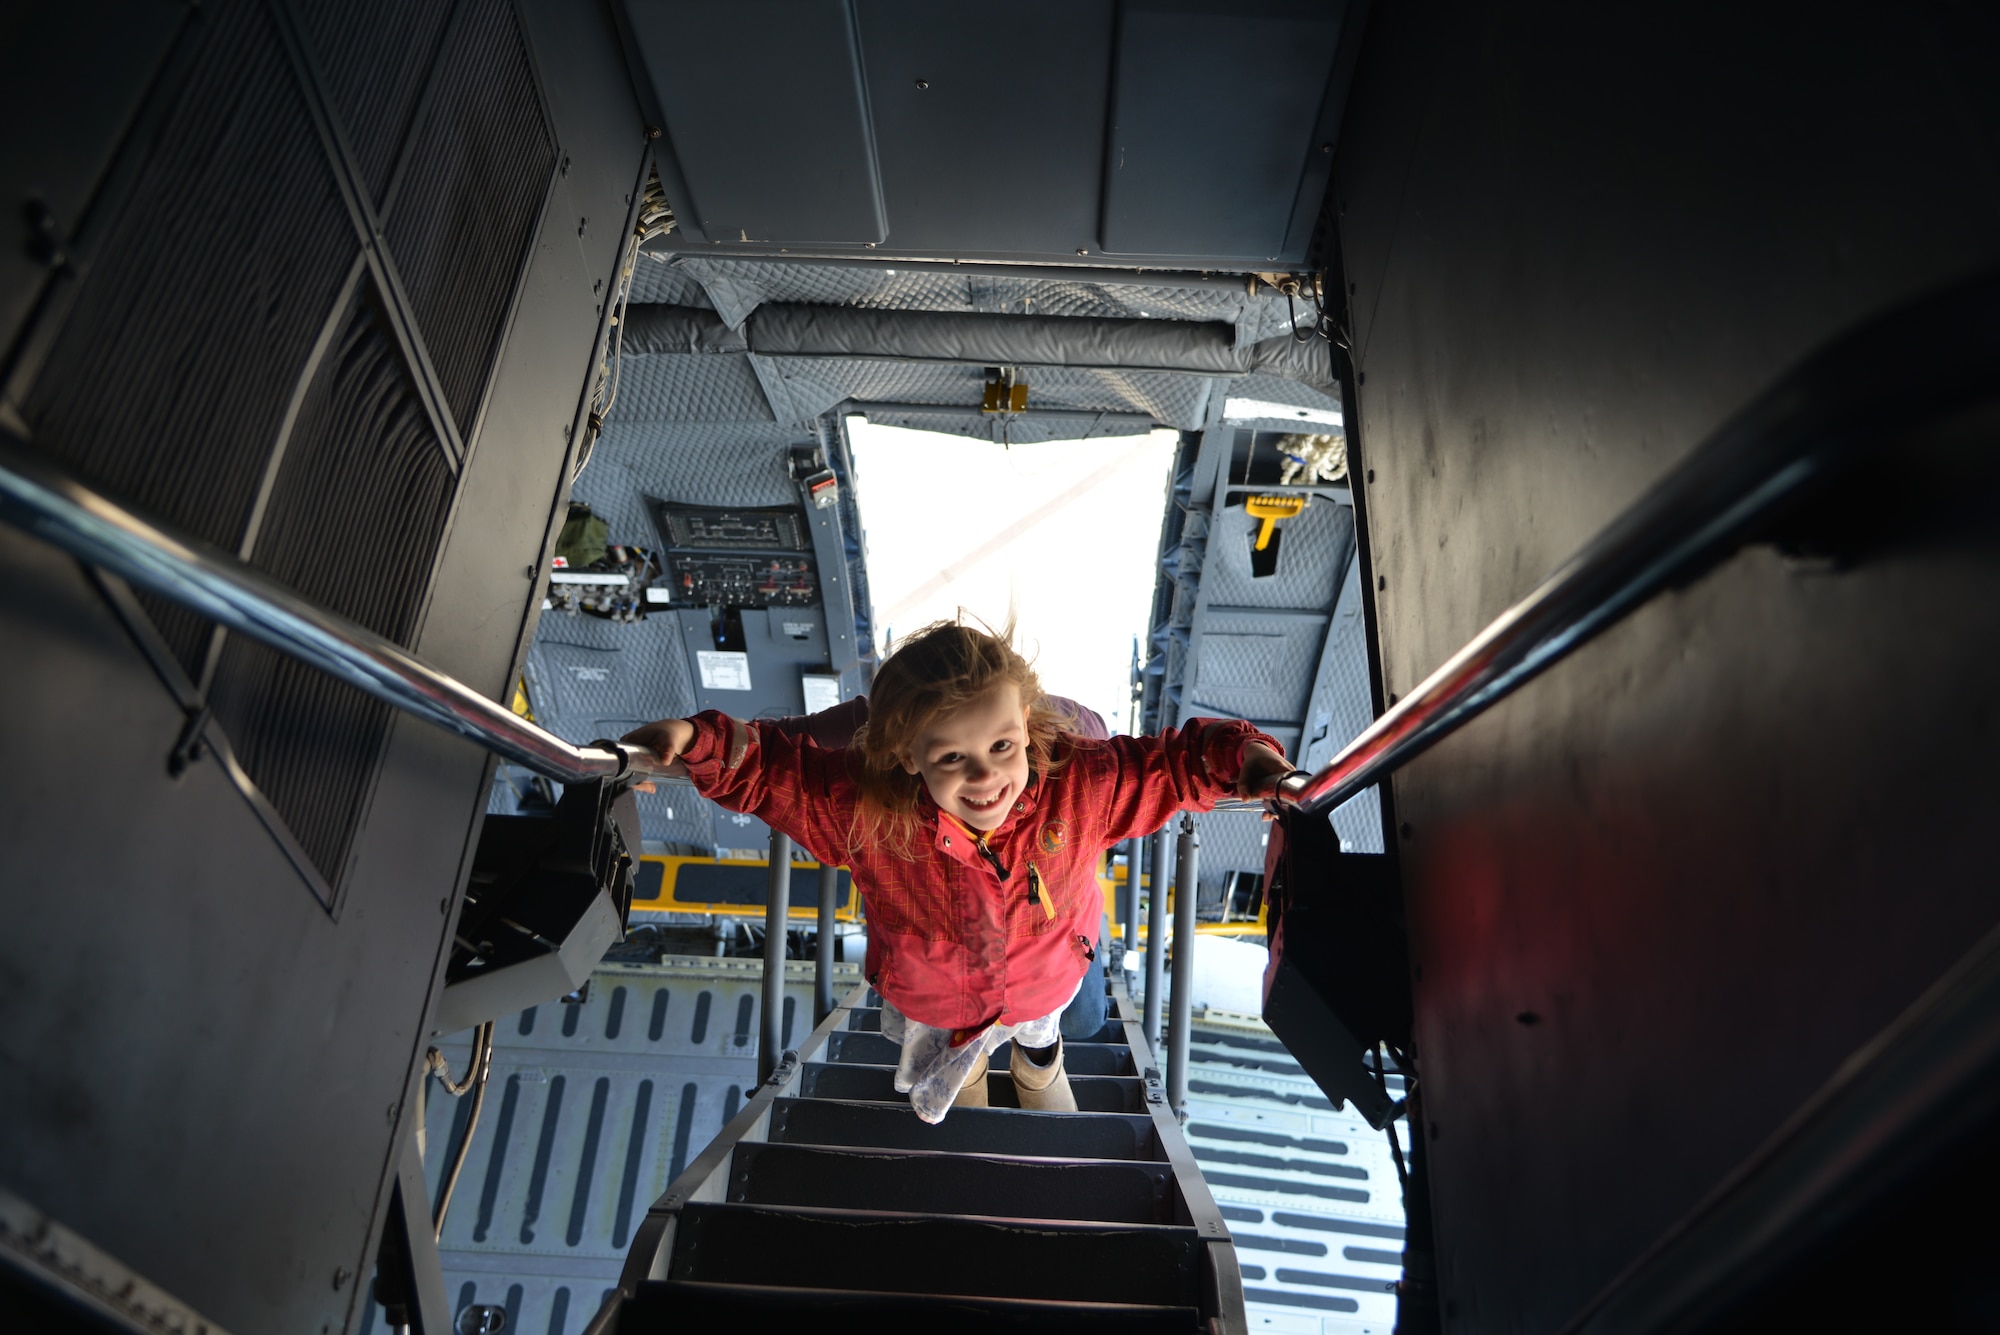 Six-year-old Vivian, boldly climbs the C-5M Super Galaxy’s ladder up to the cockpit, during the Sky’s the limit-Girls fly too” Airshow at the Abbotsford International Airport’s in British Columbia, Canada. The airport celebrated a week of International Women’s Day, March 10-11, 2018. (U.S. Air Force photo by Ms. Minnie Jones)